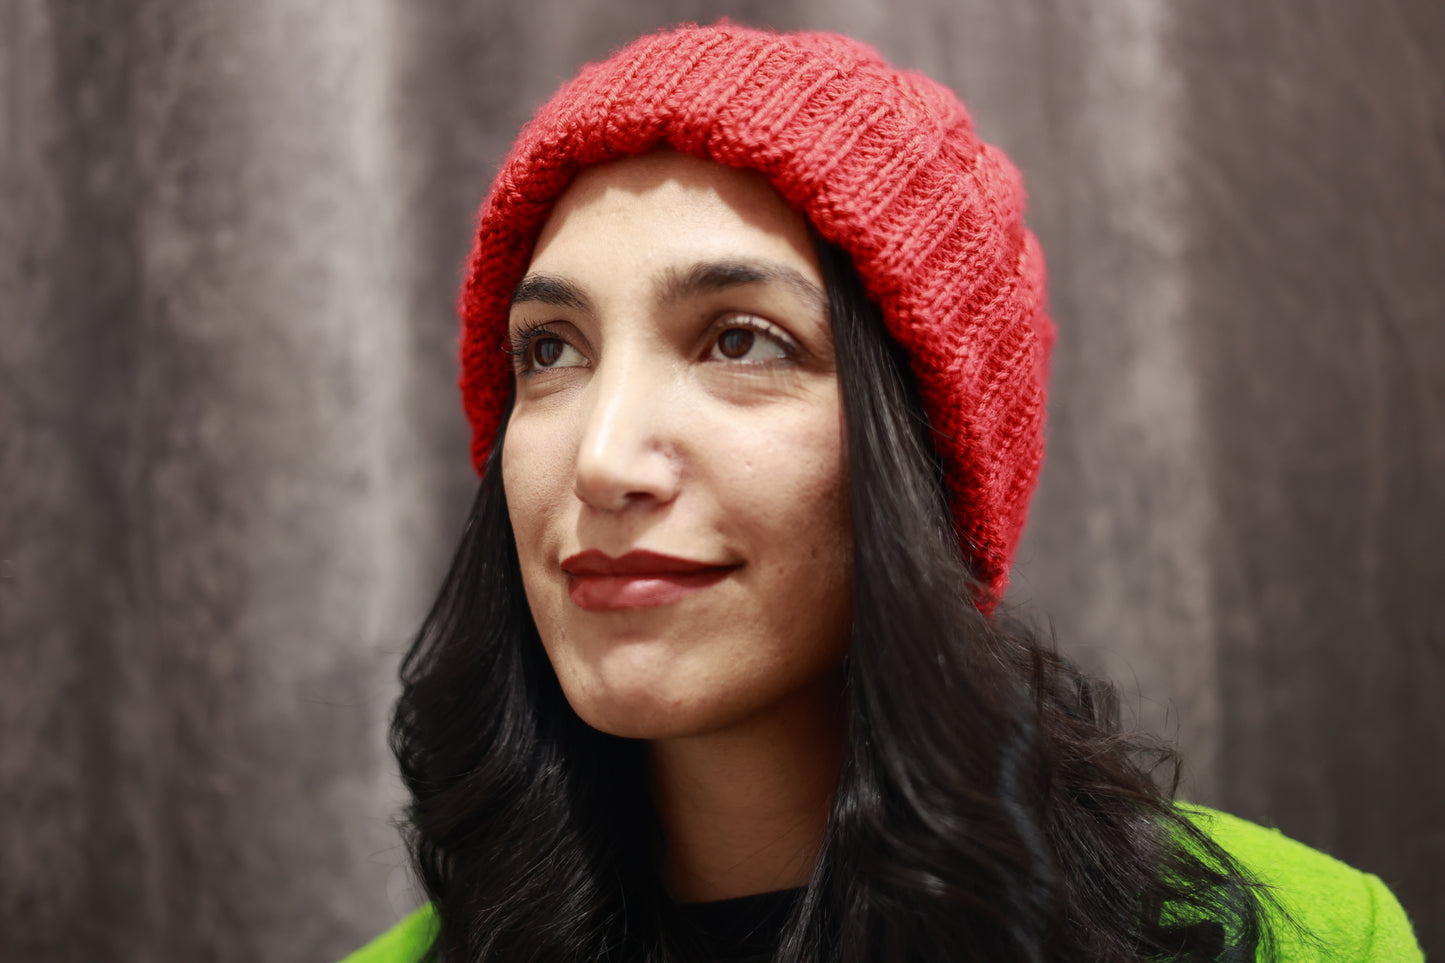 Venus Red Knitted Hat